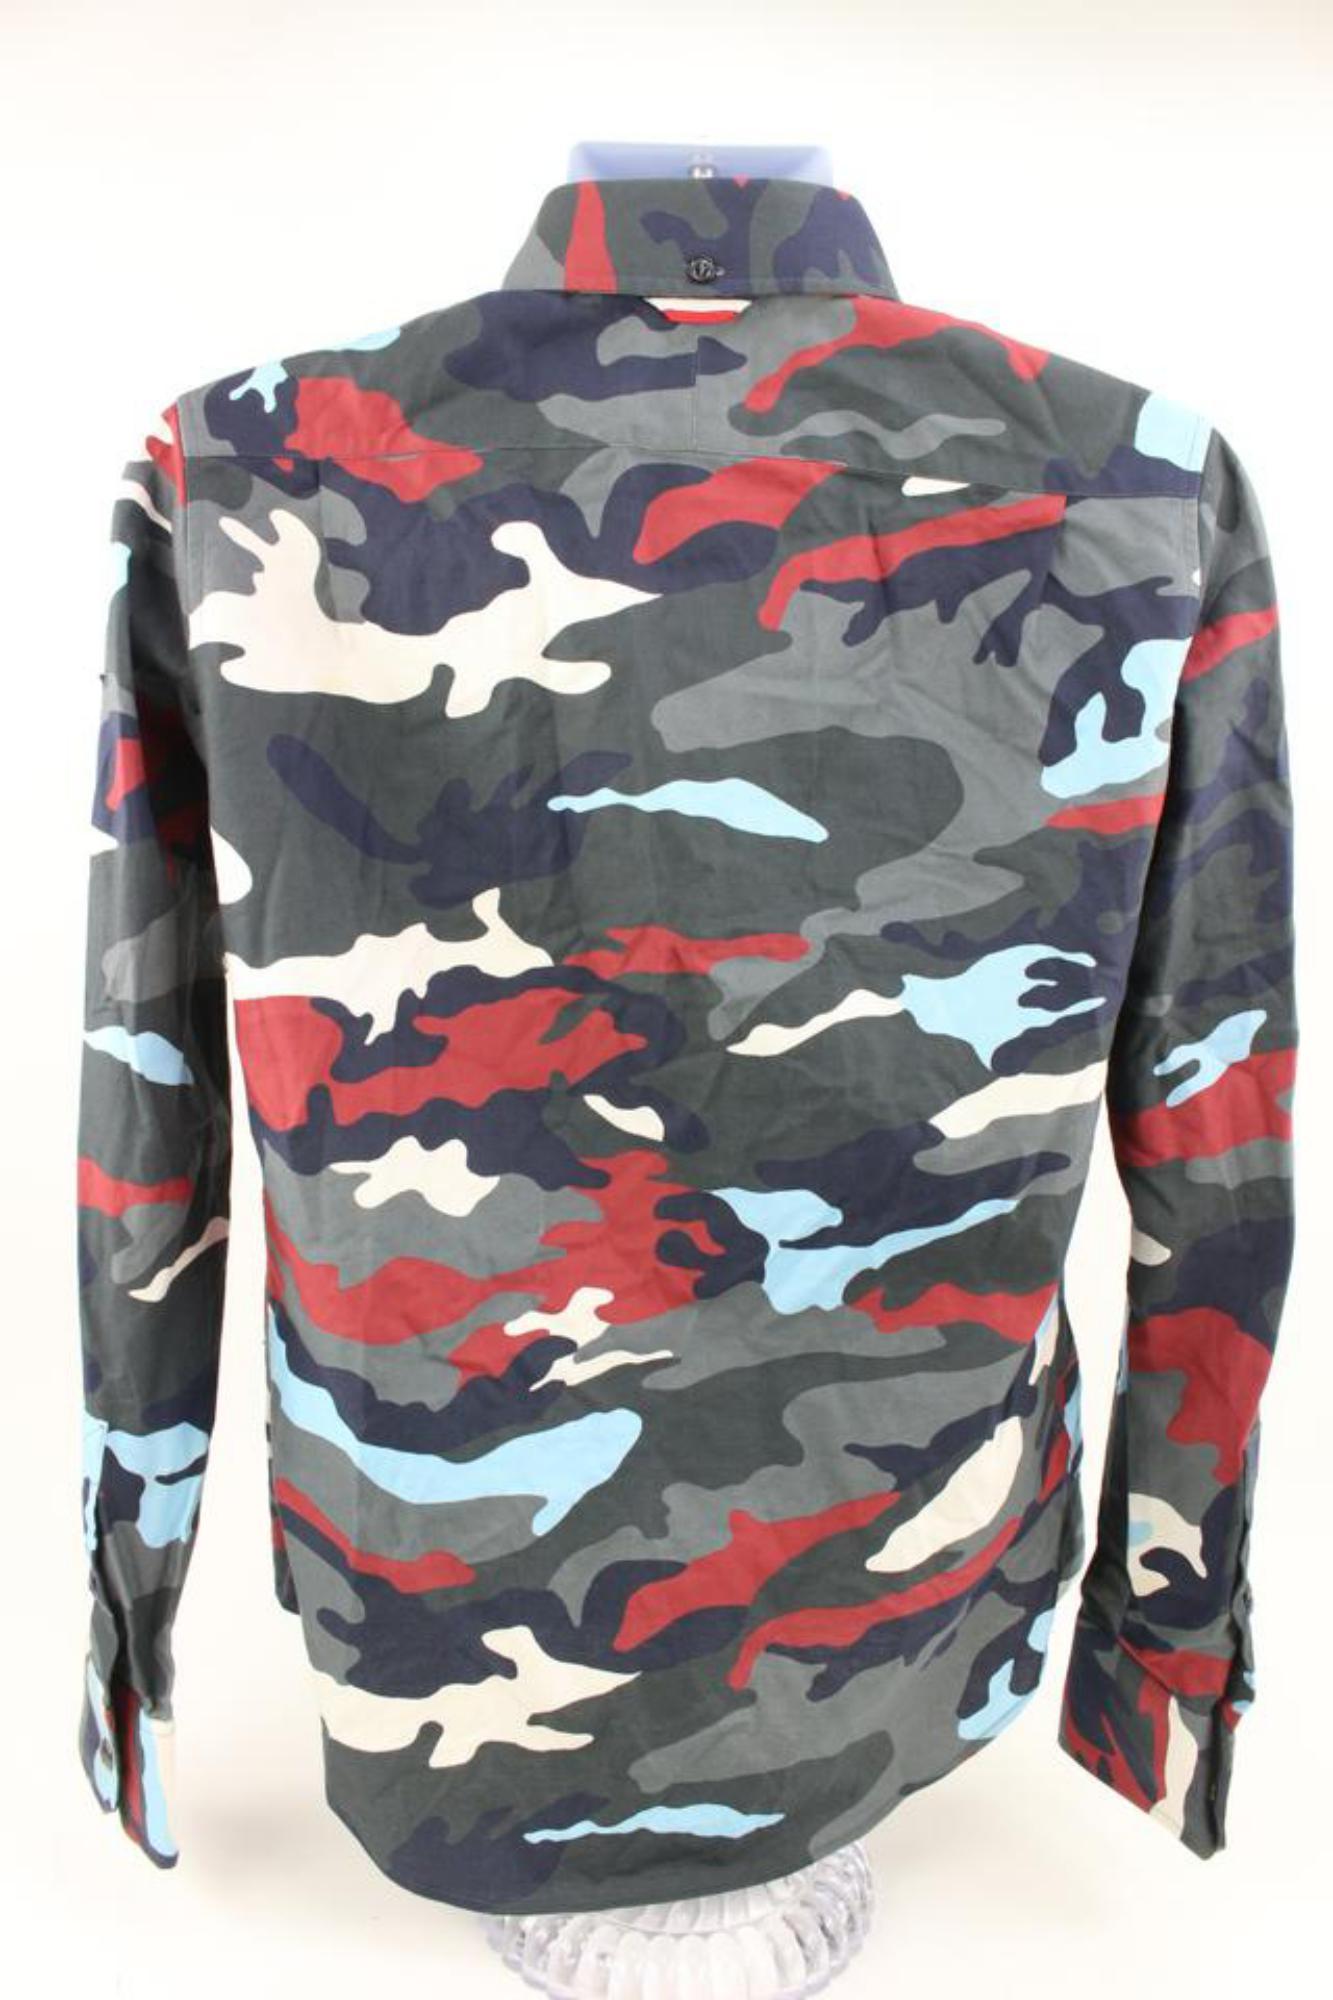 Moncler Gamme Bleu Small US Multicolor Camouflage Longsleeve Button 24mo712s In Good Condition For Sale In Dix hills, NY